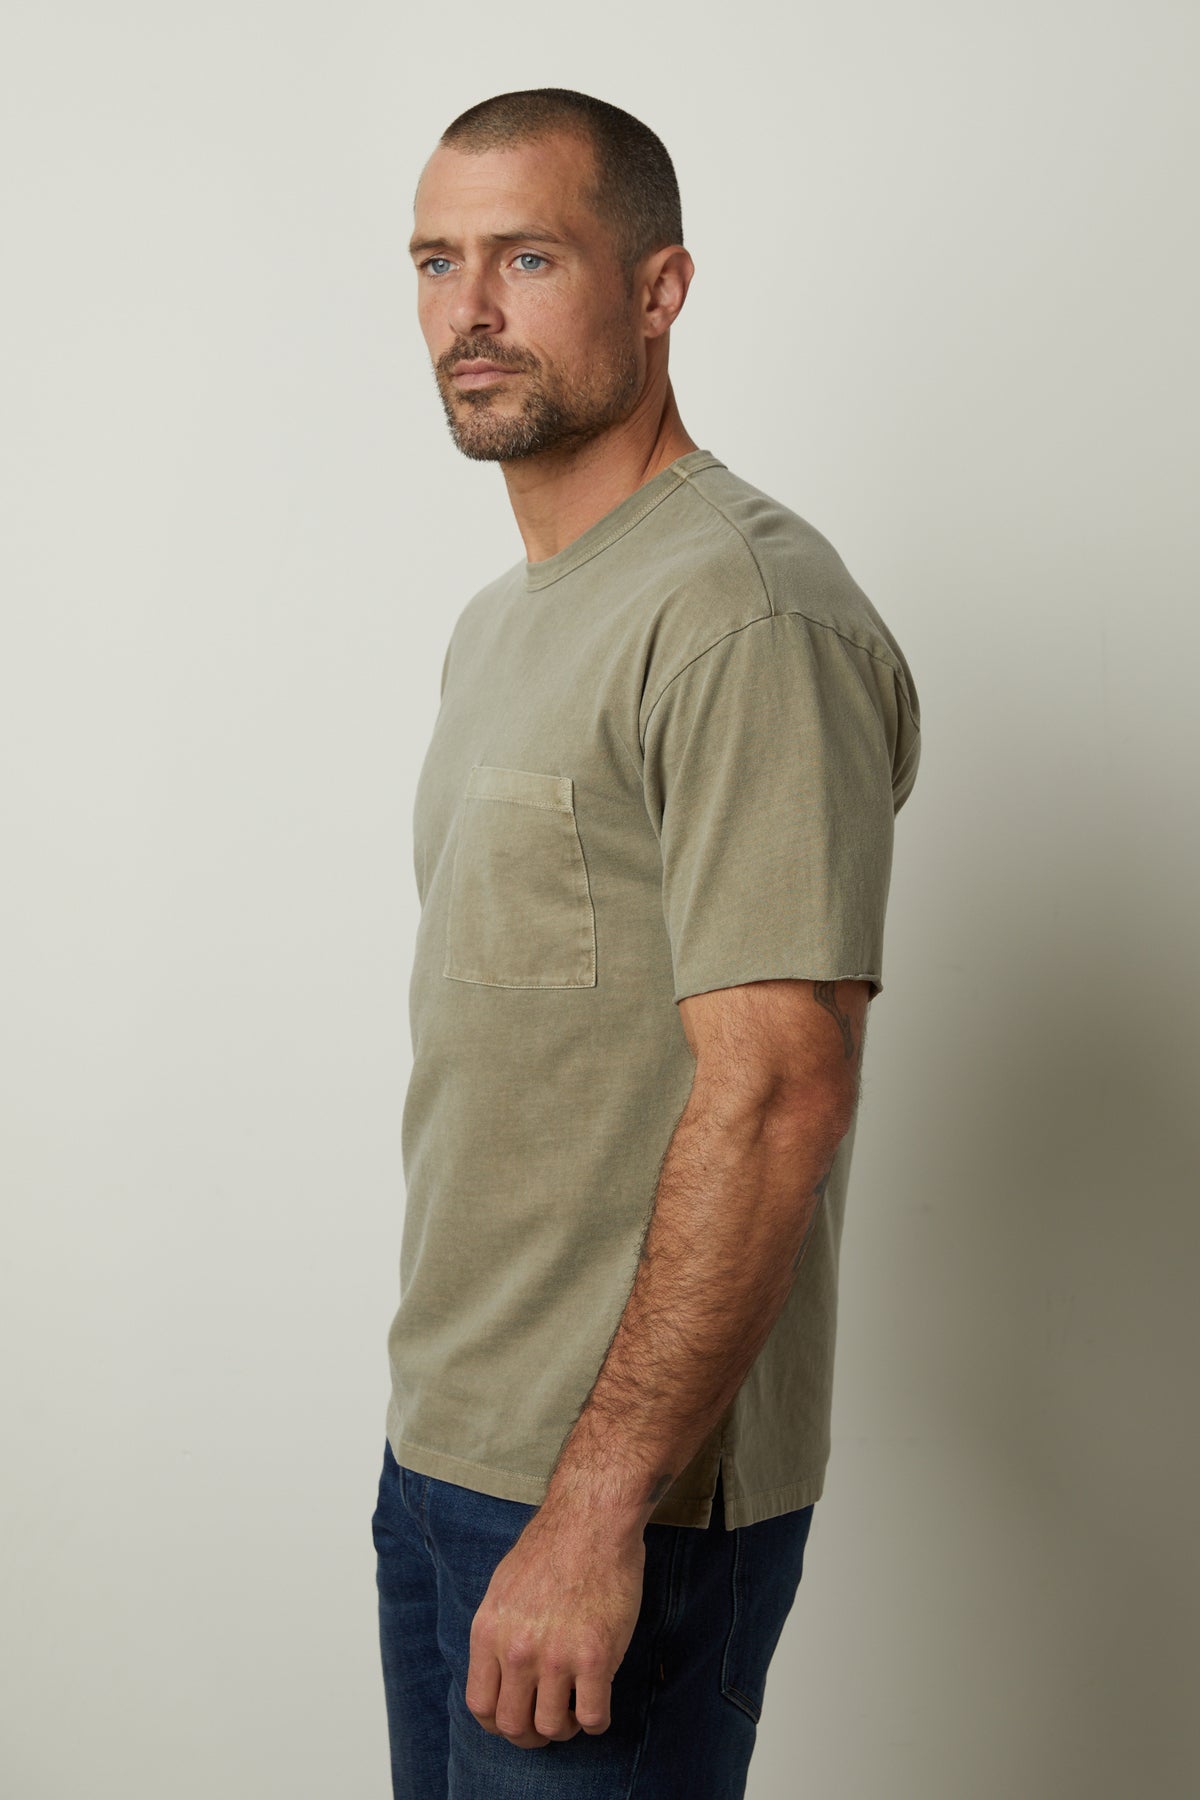 A man wearing a NEPTUNE CREW NECK POCKET TEE by Velvet by Graham & Spencer and jeans.-26827673174209